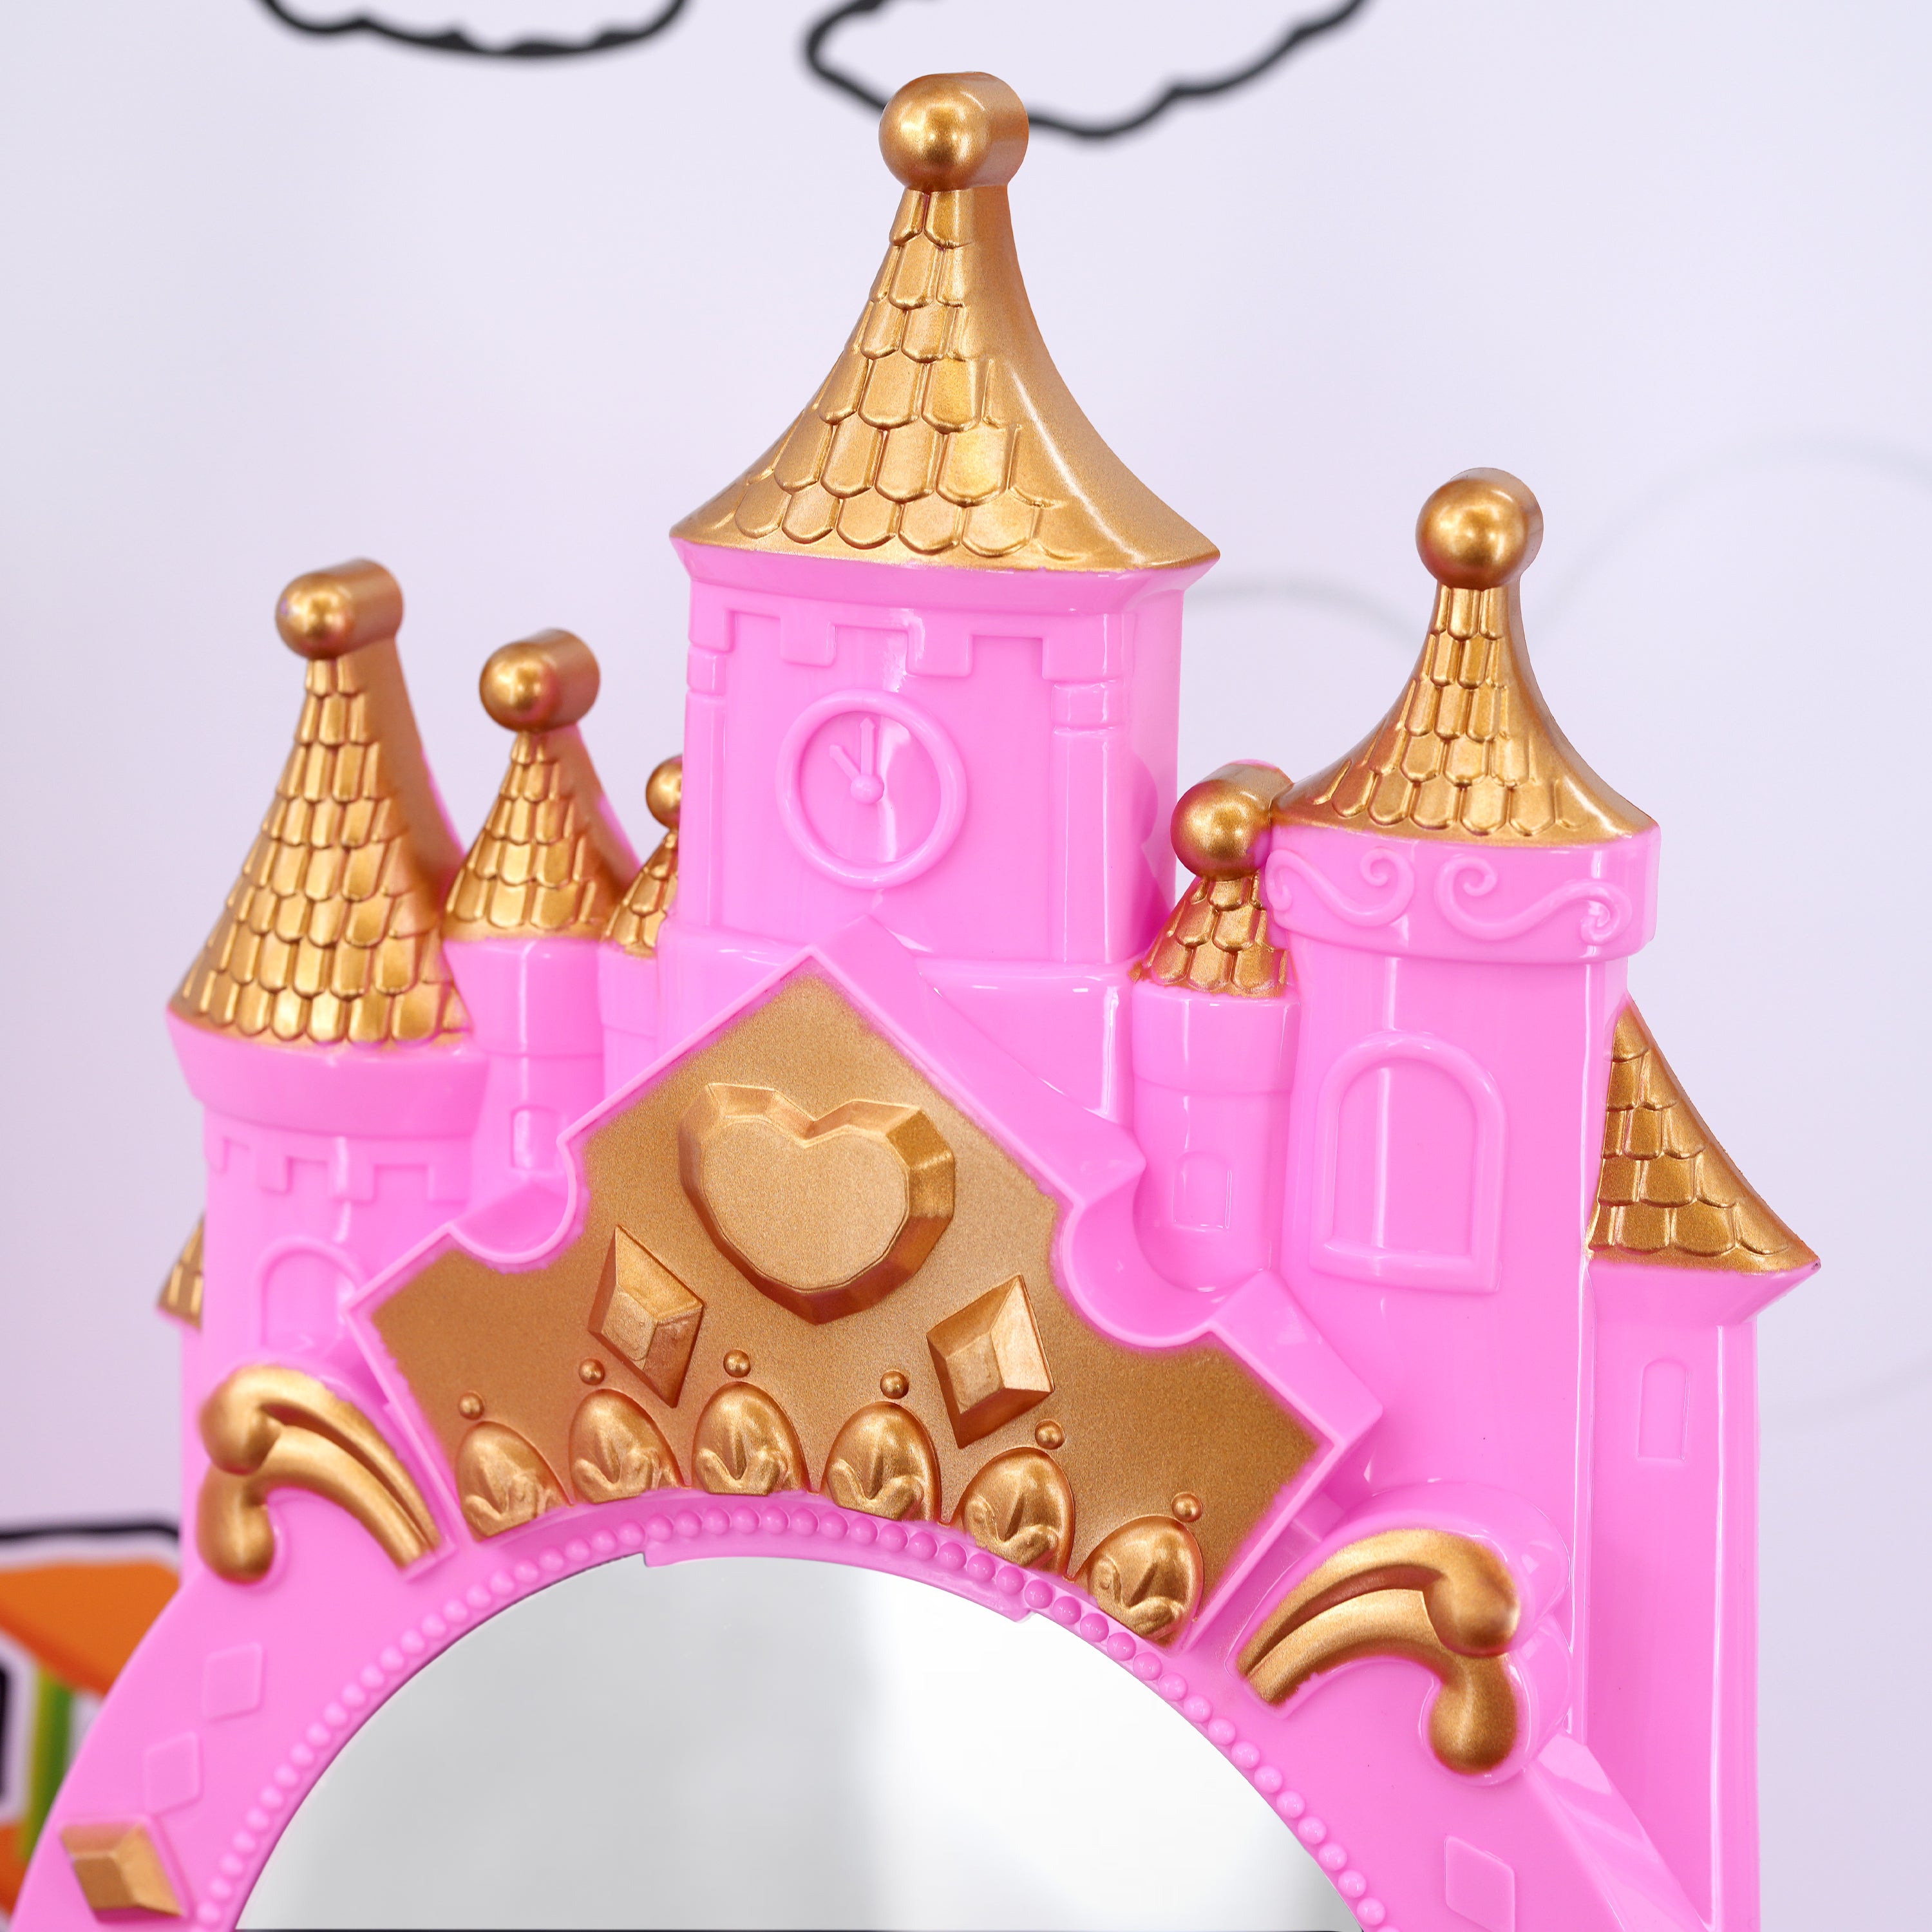 Princess Vanity Dressing Table & Stool Toy The Magic Toy Shop - The Magic Toy Shop